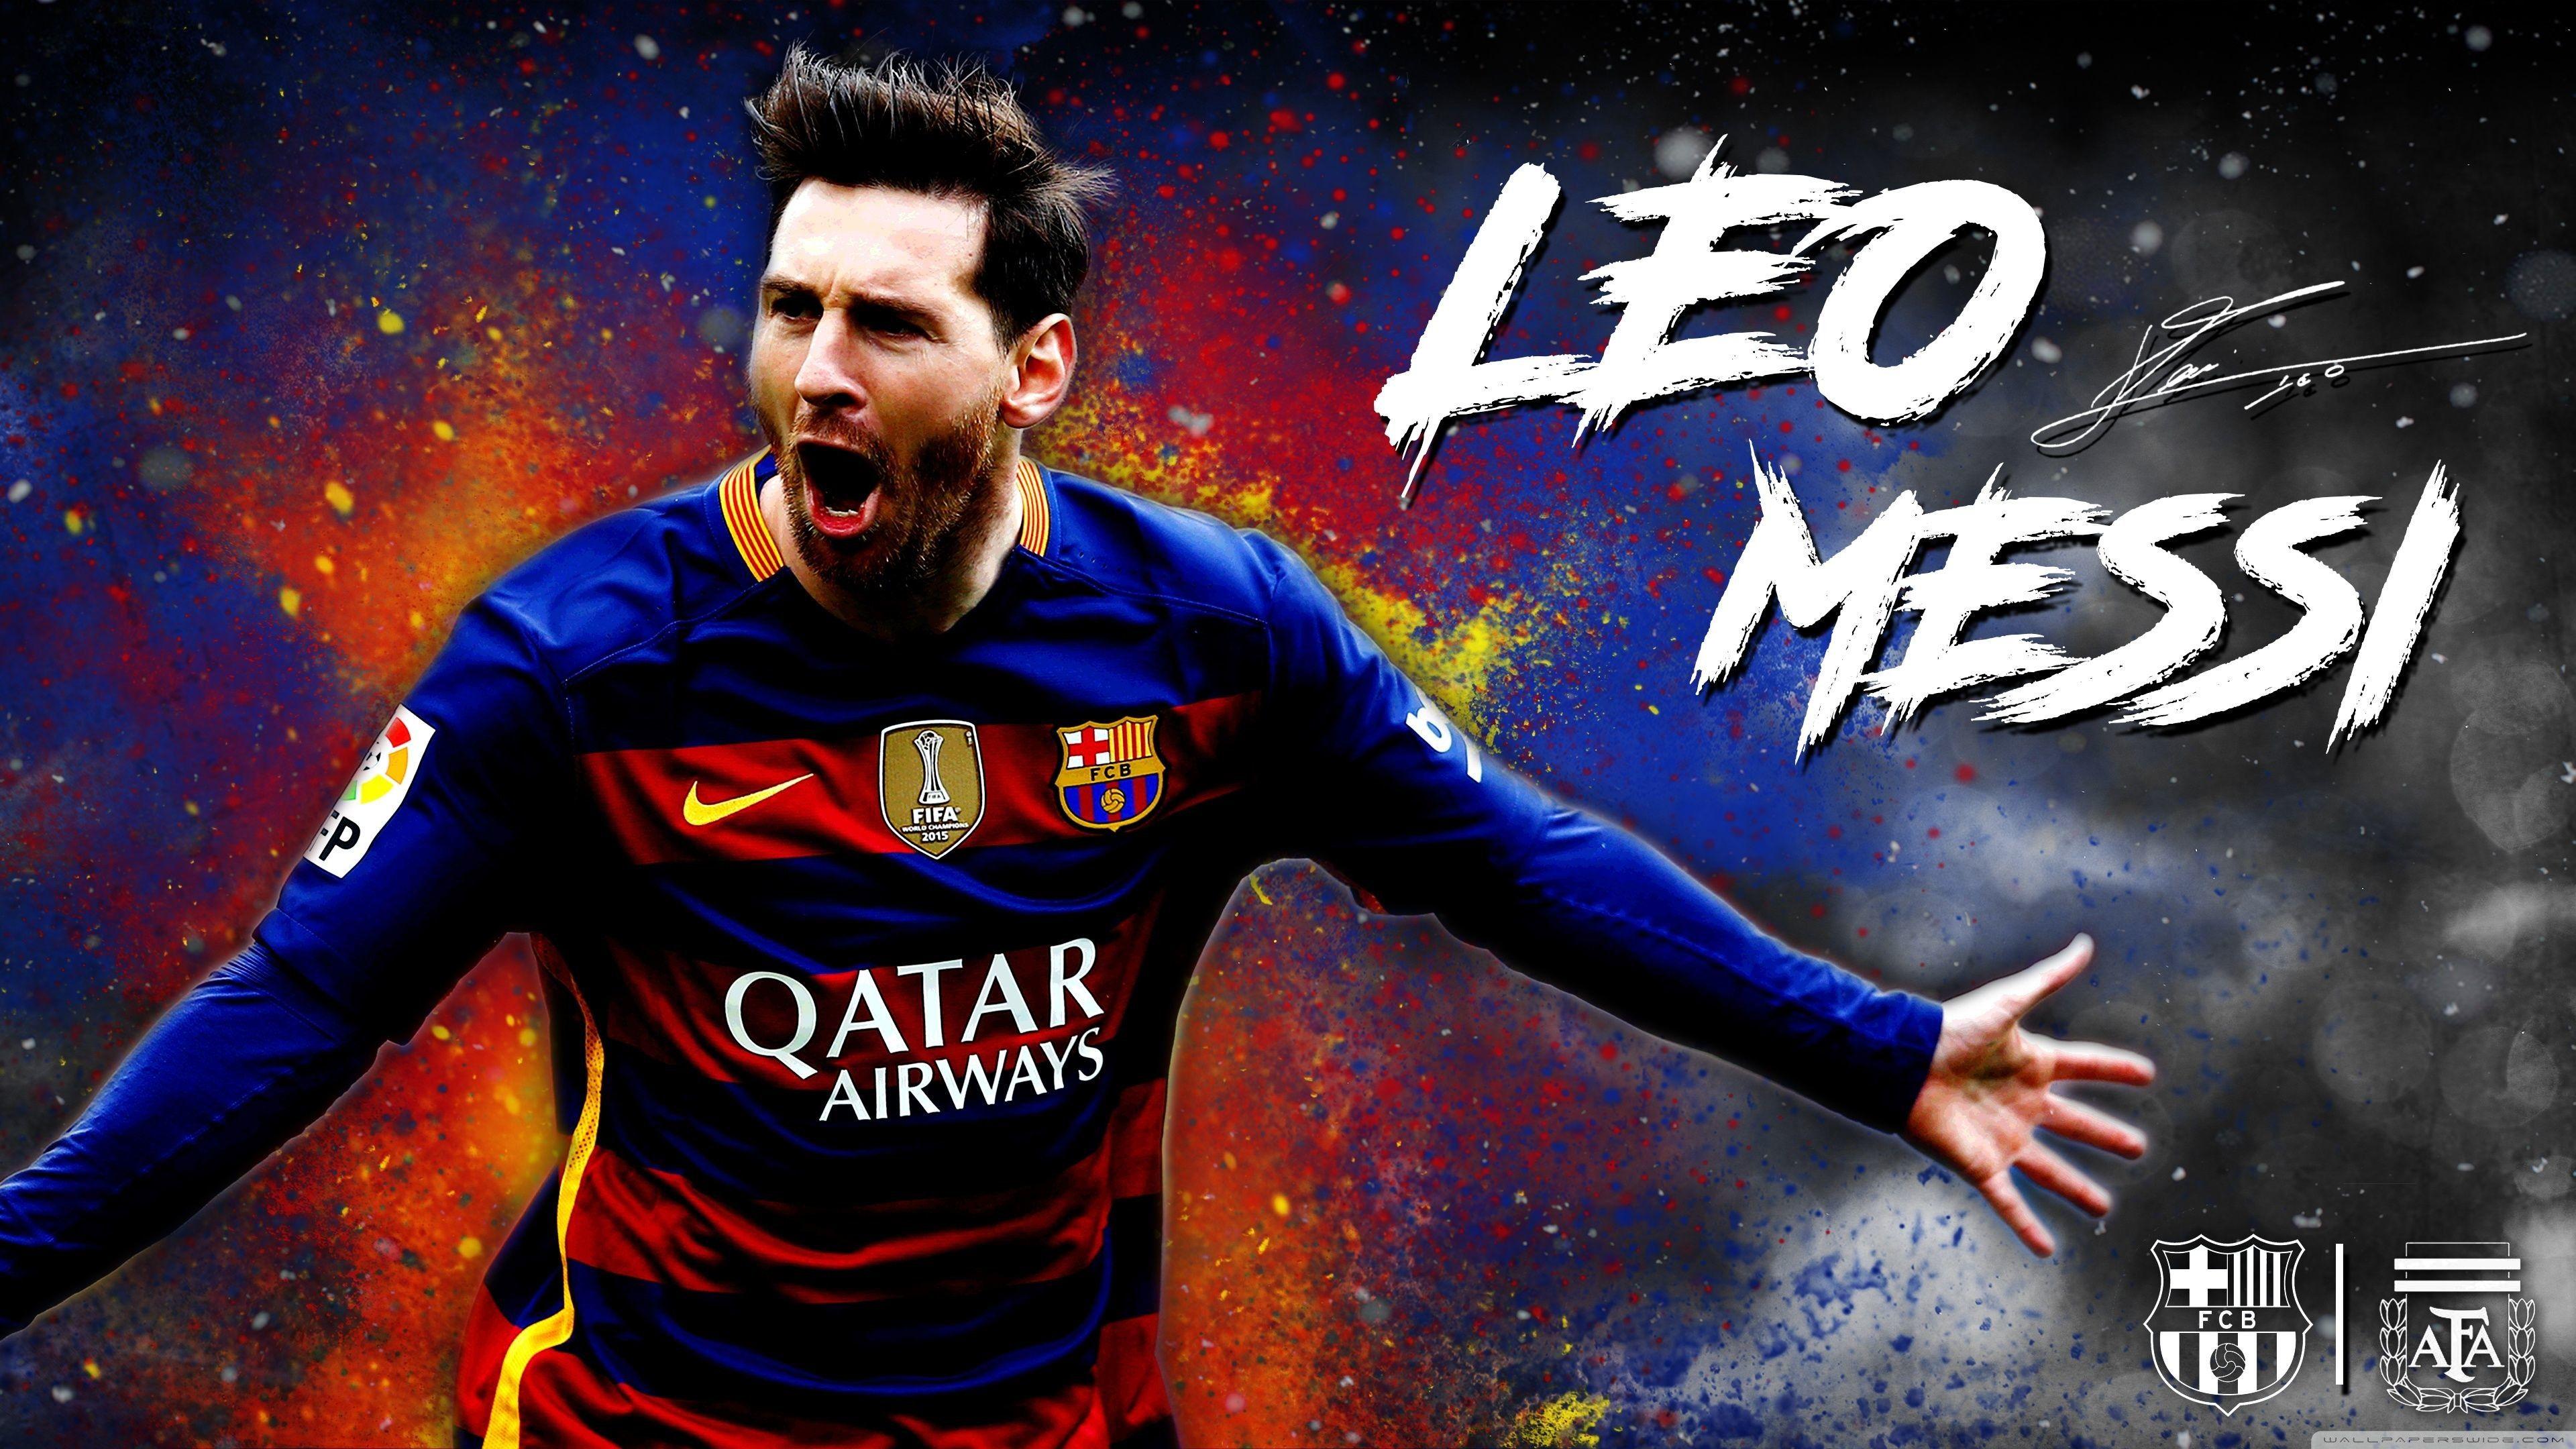 3840 x 2160 · jpeg - Messi Soccer Wallpapers - Top Free Messi Soccer Backgrounds ...